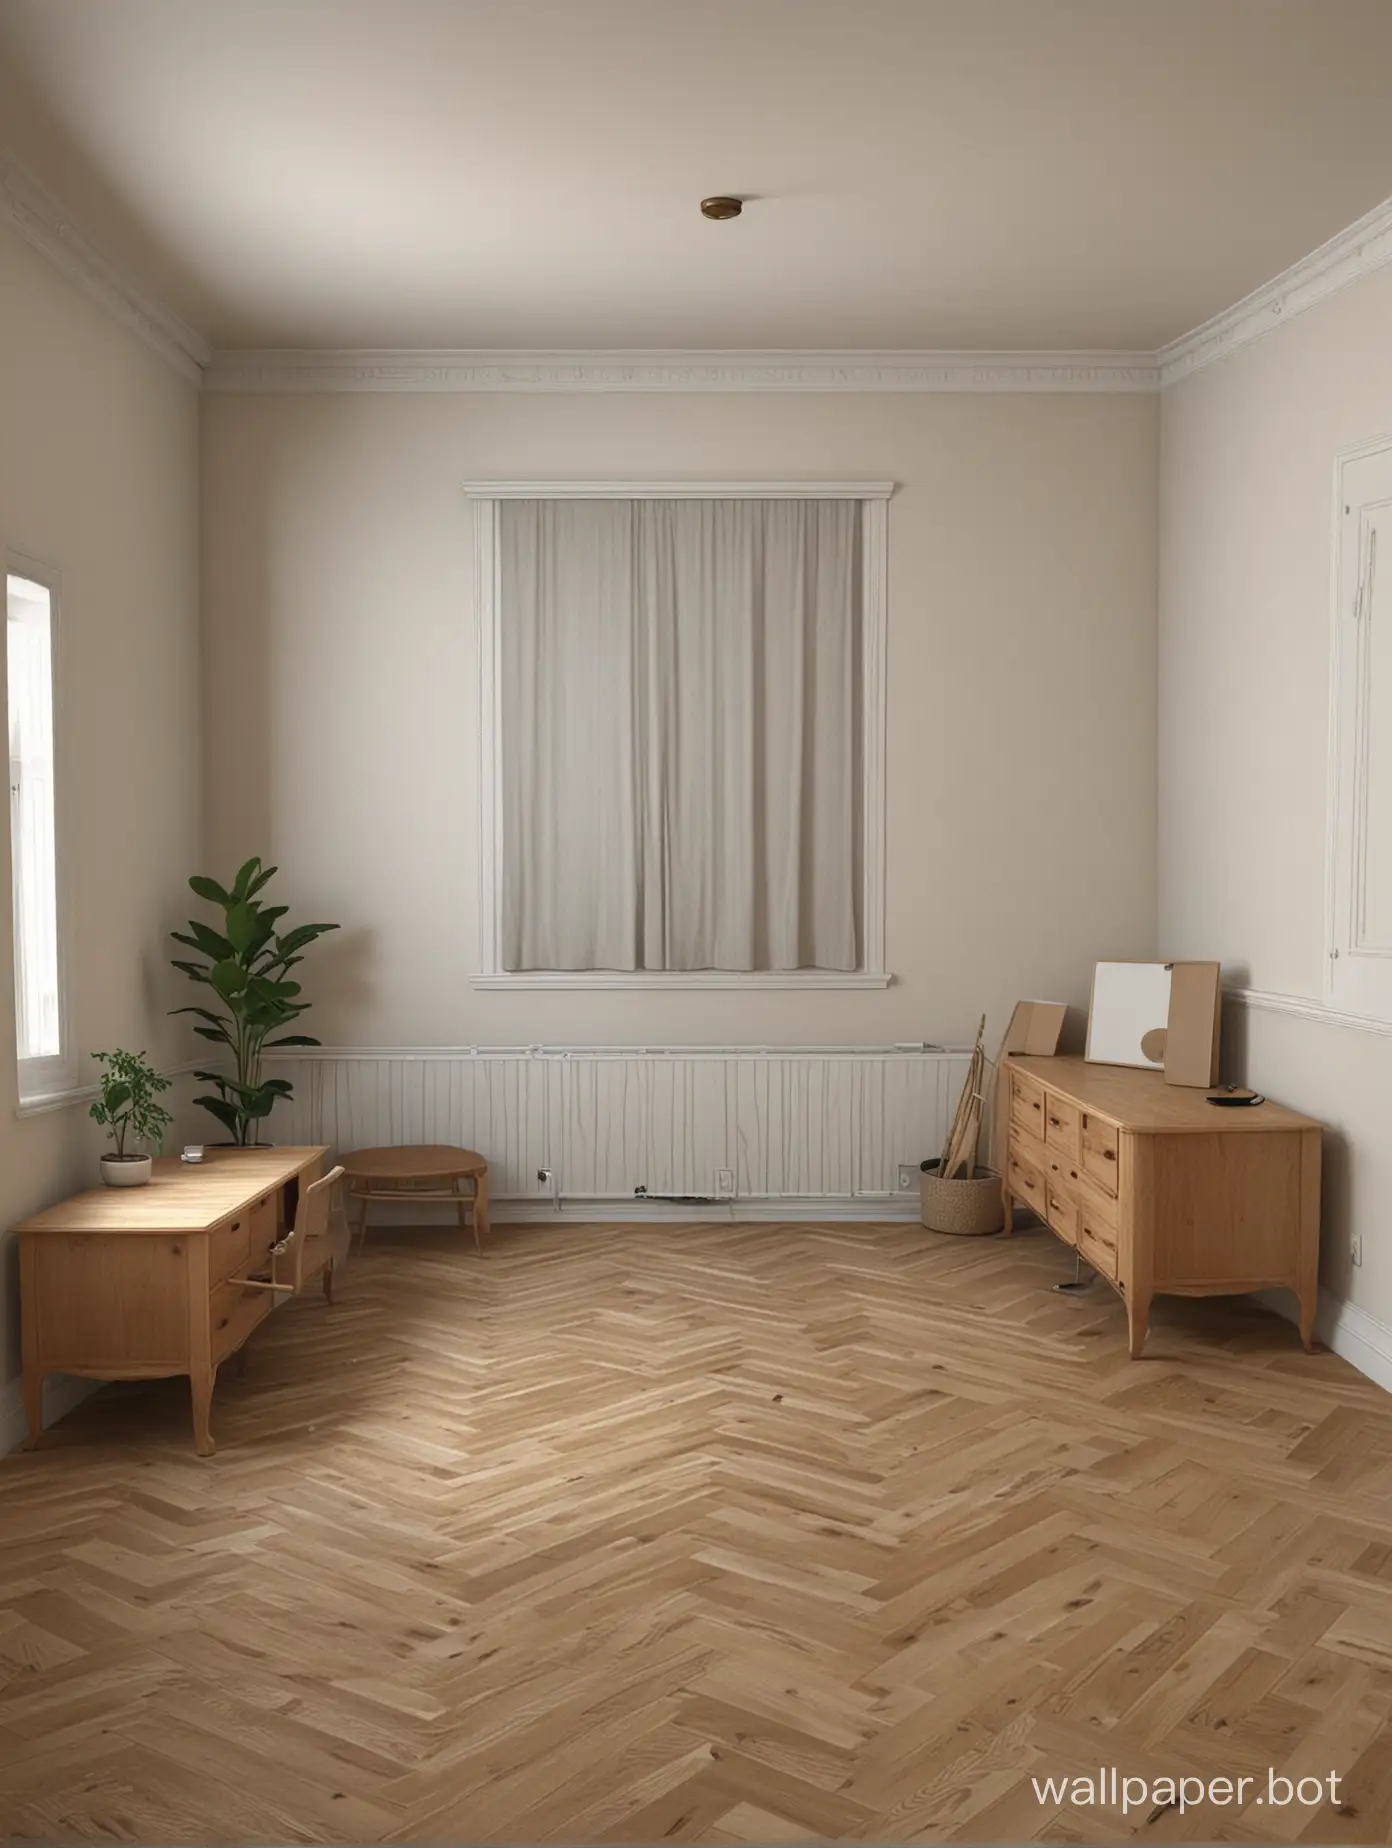 Spacious-Minimalist-Room-with-No-Furniture